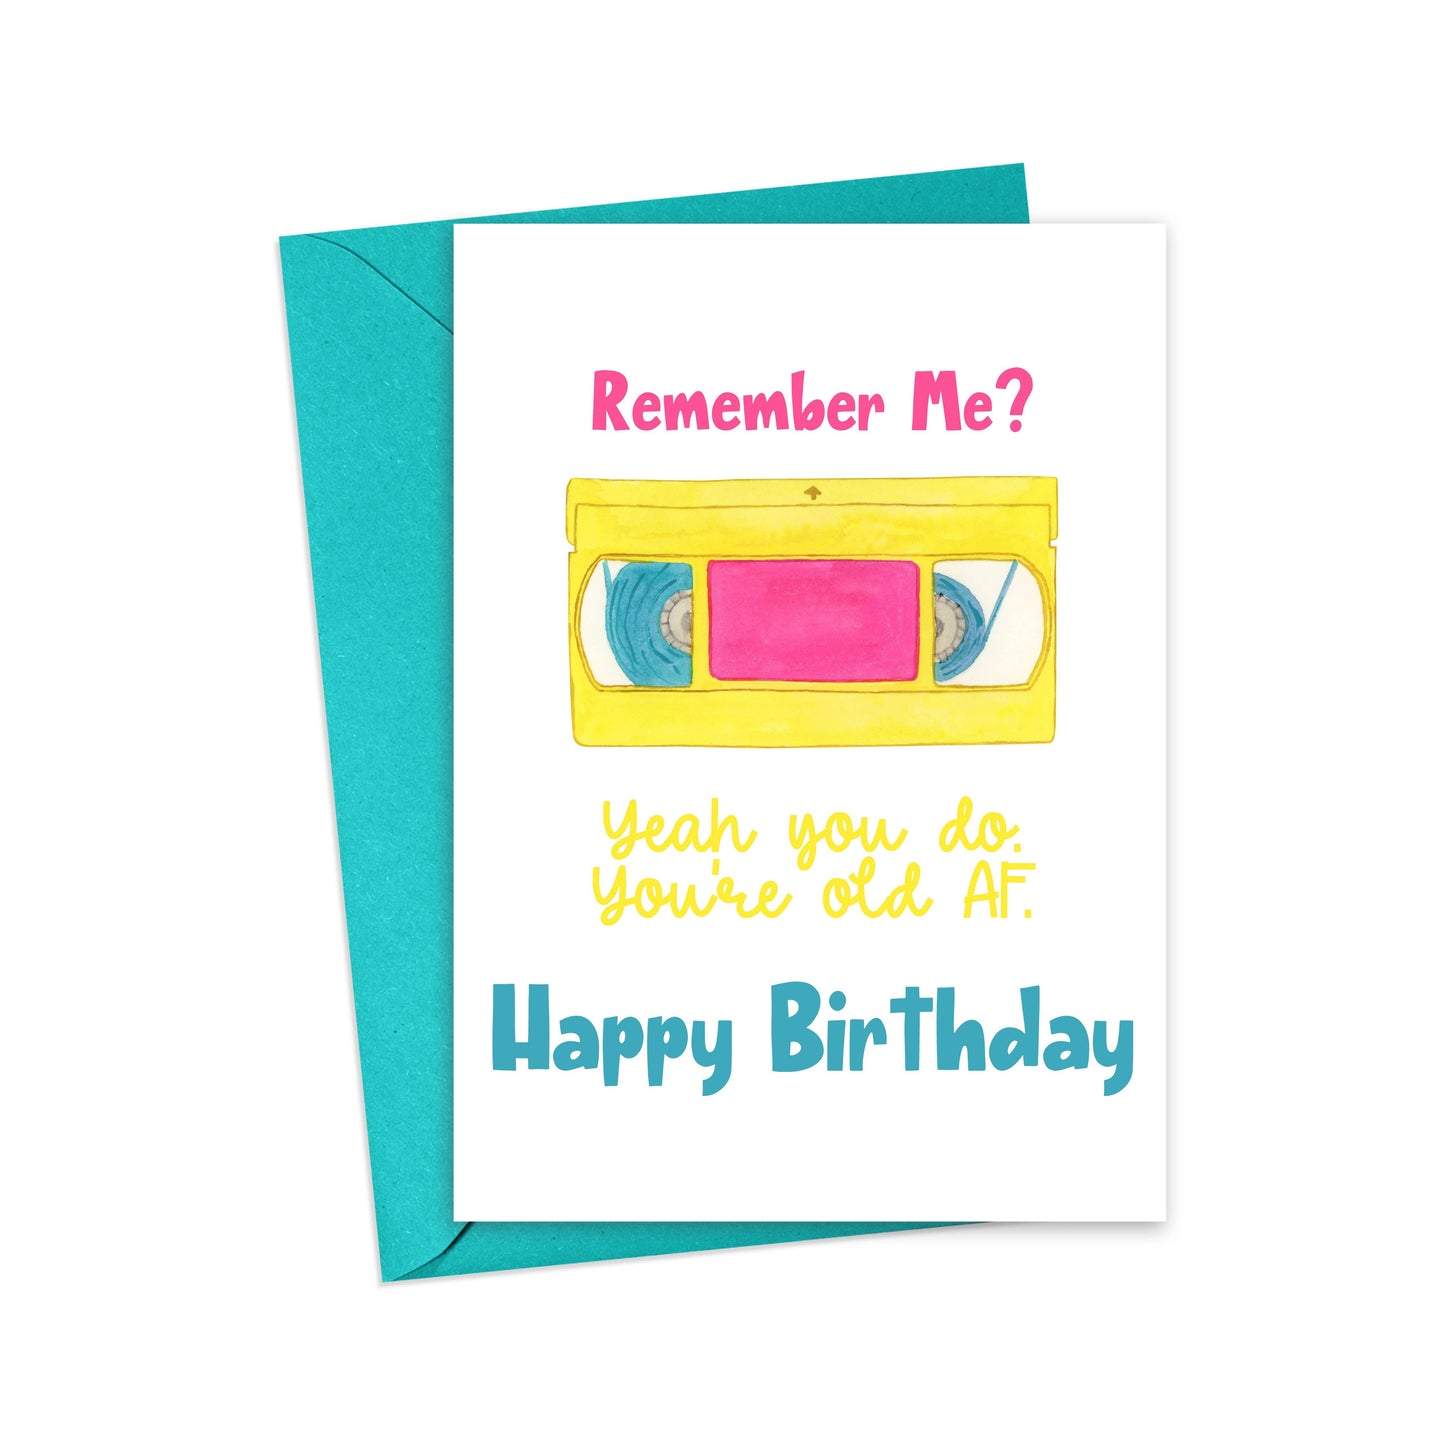 R is for Robo - 90s Retro Birthday Card - You're Old Funny Birthday Card